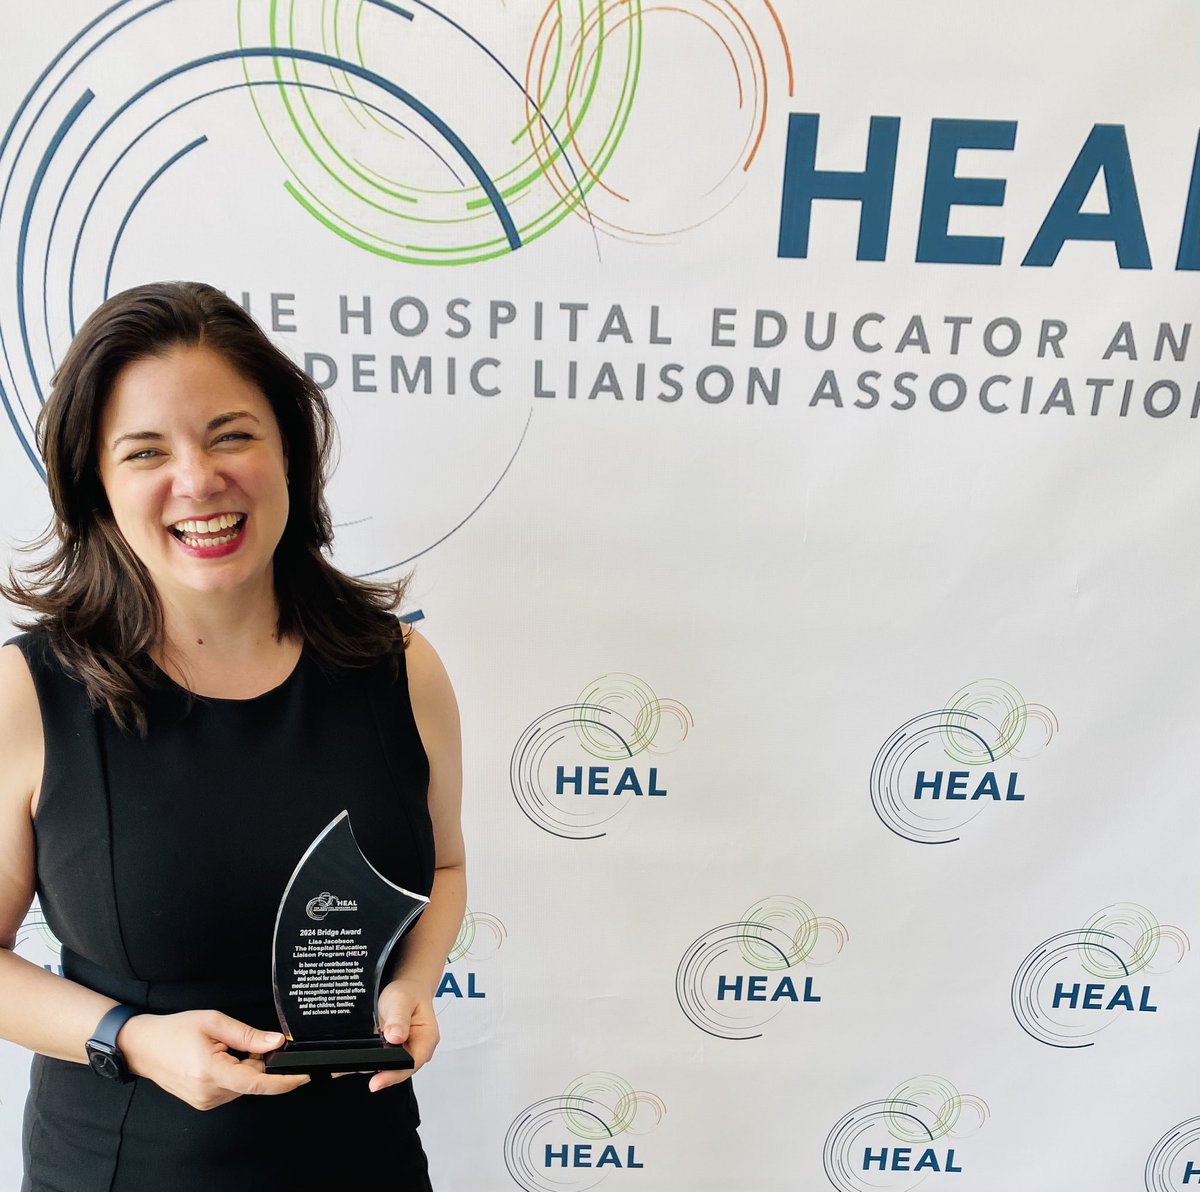 Congratulations to Dr. Lisa Carey on receiving the Hospital Educator and Academic Liaison Association Bridge Award for her work as the school liaison for the Hospital Education Liaison Program (HELP) at Kennedy Krieger! @EquitableAccess